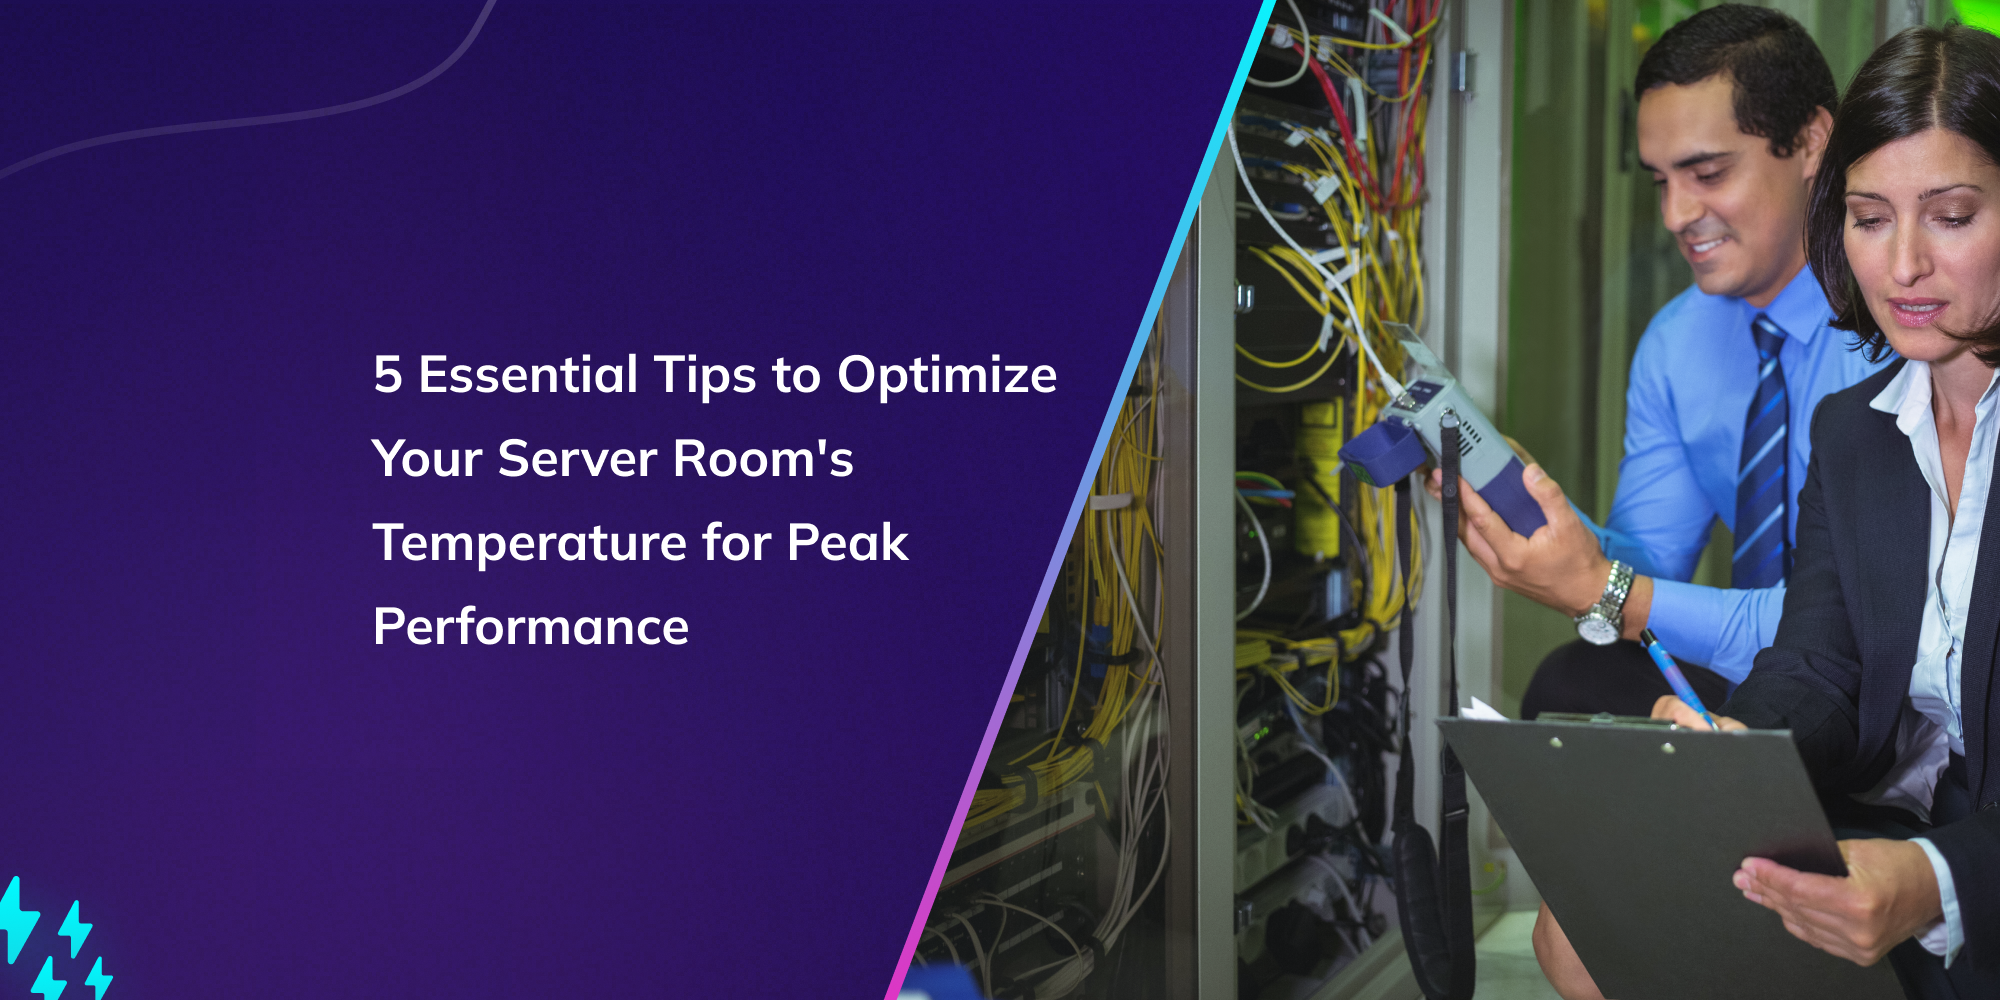 5 Essential Tips to Optimize Your Server Room's Temperature for Peak Performance